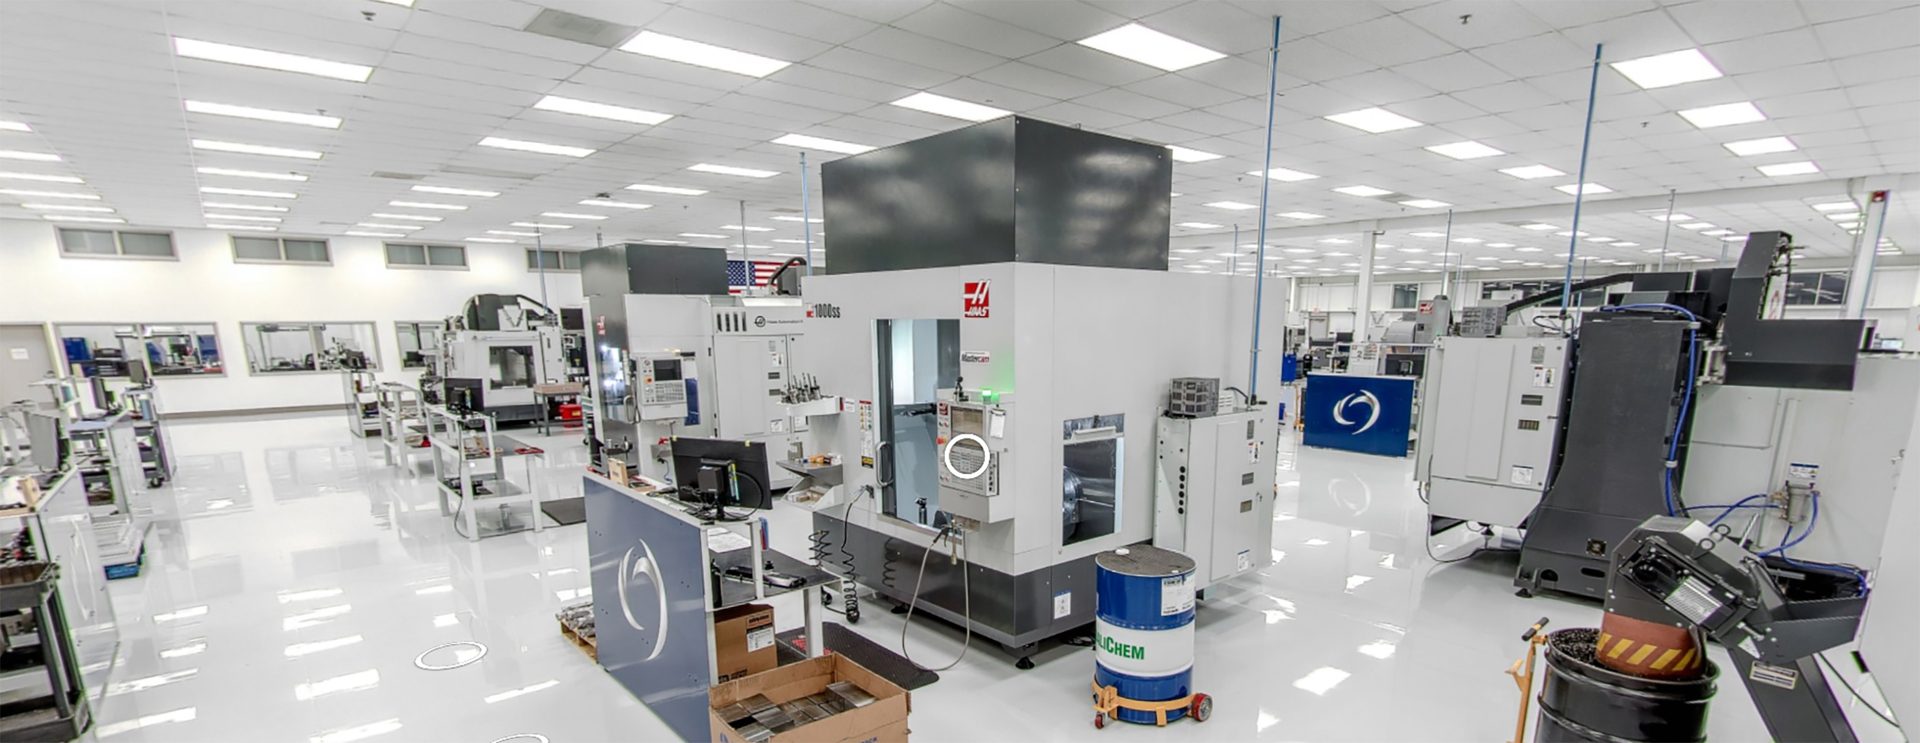 Impressive 200 ft. long CNC machining area in one of RYEs two 80,000-sq.-ft. world class manufacturing facilities where Starrett DataSure 4.0 is deployed.